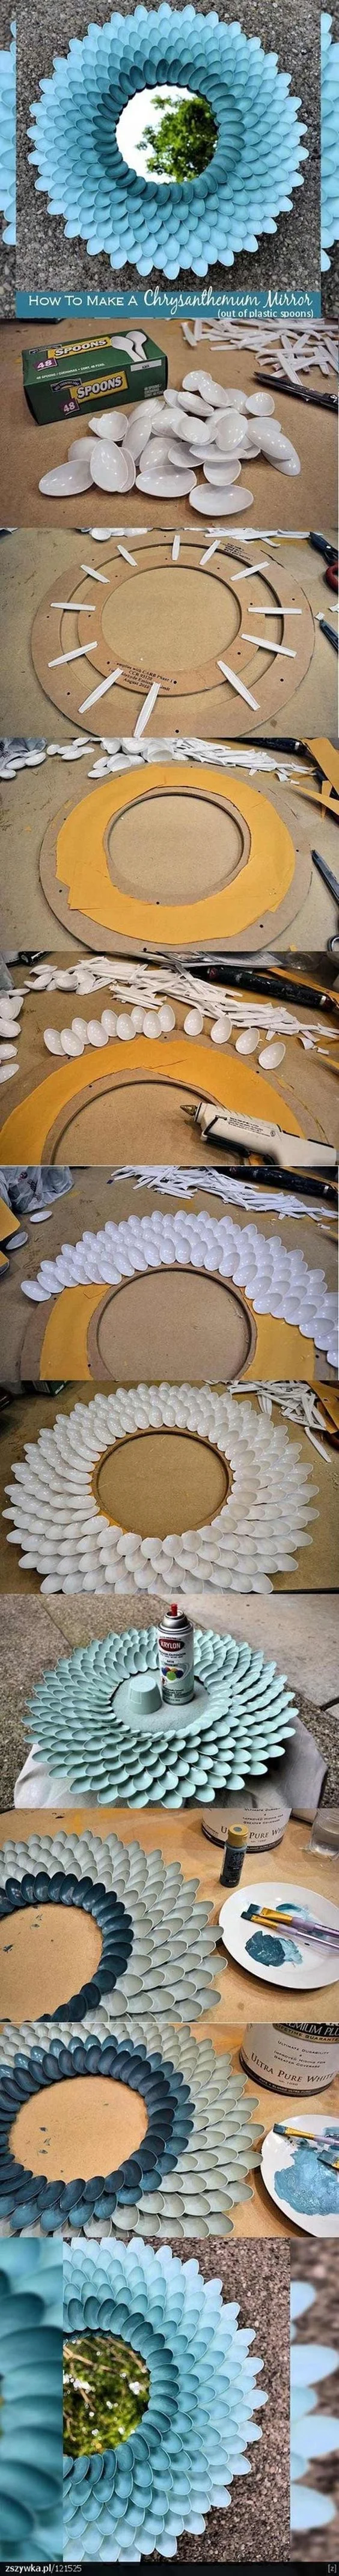 BUILD A CHRYSANTHEMUM MIRROR WITH PLASTIC SPOONS